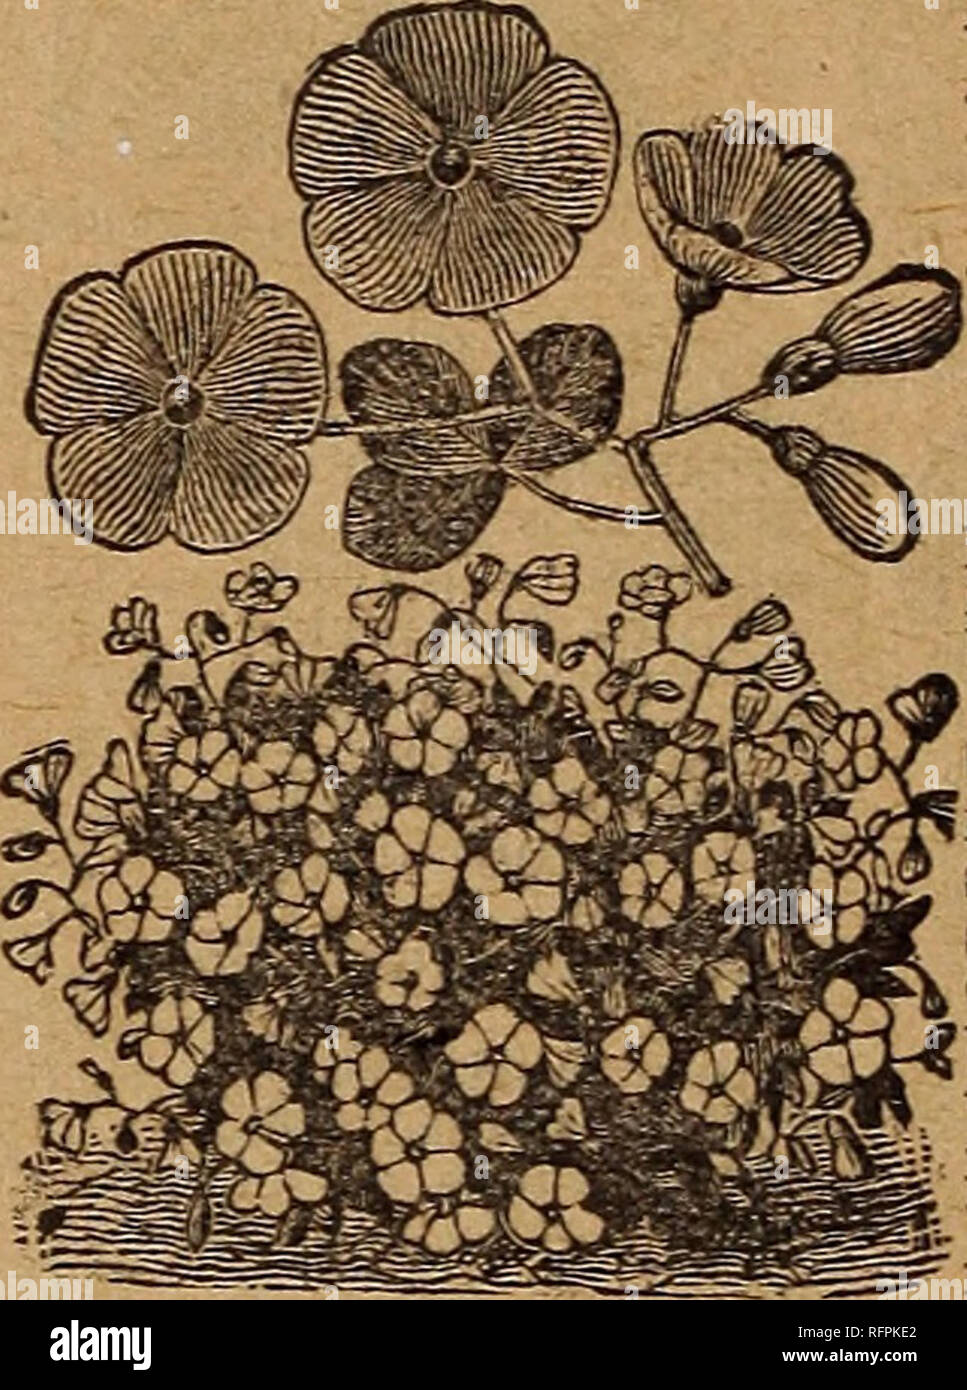 . Park's floral guide, 1896. Nursery stock Pennsylvania Catalogs; Flowers Seeds Catalogs. CE. LA MAKC.KLIA.es A. sown seeds. CE. Missourien- sis, shown in engraving, is a fine herbaceous plant, prostrate in habit and bear- ing rich, clear,golden yellow flowers from four to five ce, MTssoTTKTEsrsis. inches across. It is a valuable border plant, as it covers the ground with a sheet of golden color. Oxalis (&quot;Wood Sorrel), mostly from Cape of G. Hope. Floribunda, rose.... 5 Alba, white 5 Rosea, see eng...... 5 Alba, white 5 Delicata 5 Sensitiva 5 rropceoloides 5 All kinds mixed.... 5 Valuable Stock Photo